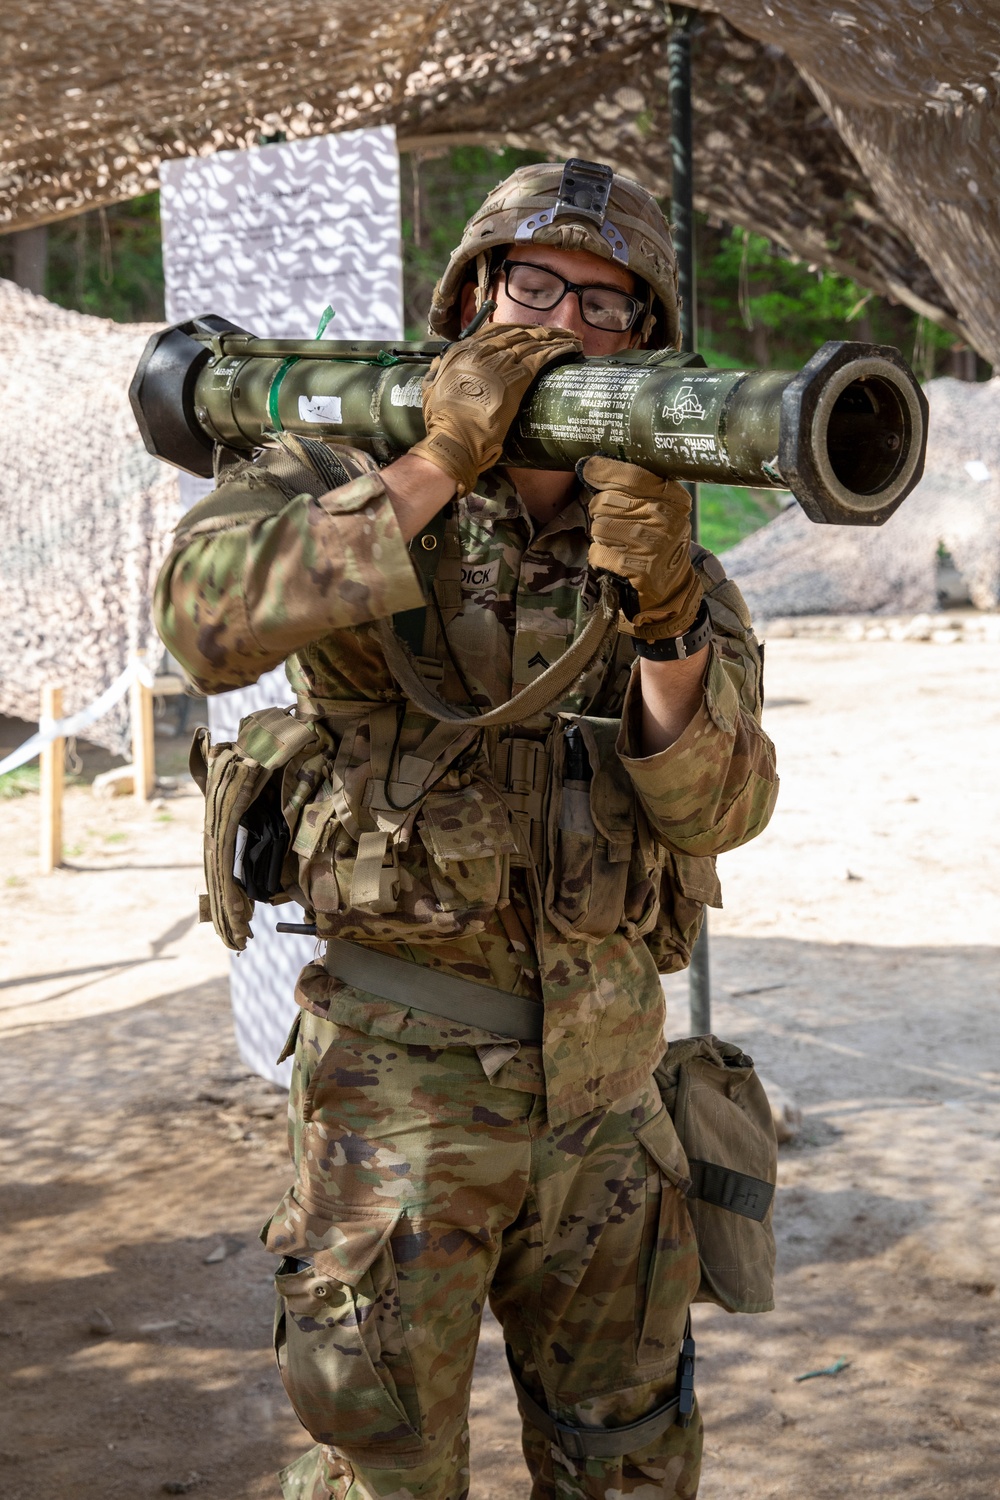 U.S., ROK Soldiers Conduct E3B On the DMZ Day Two